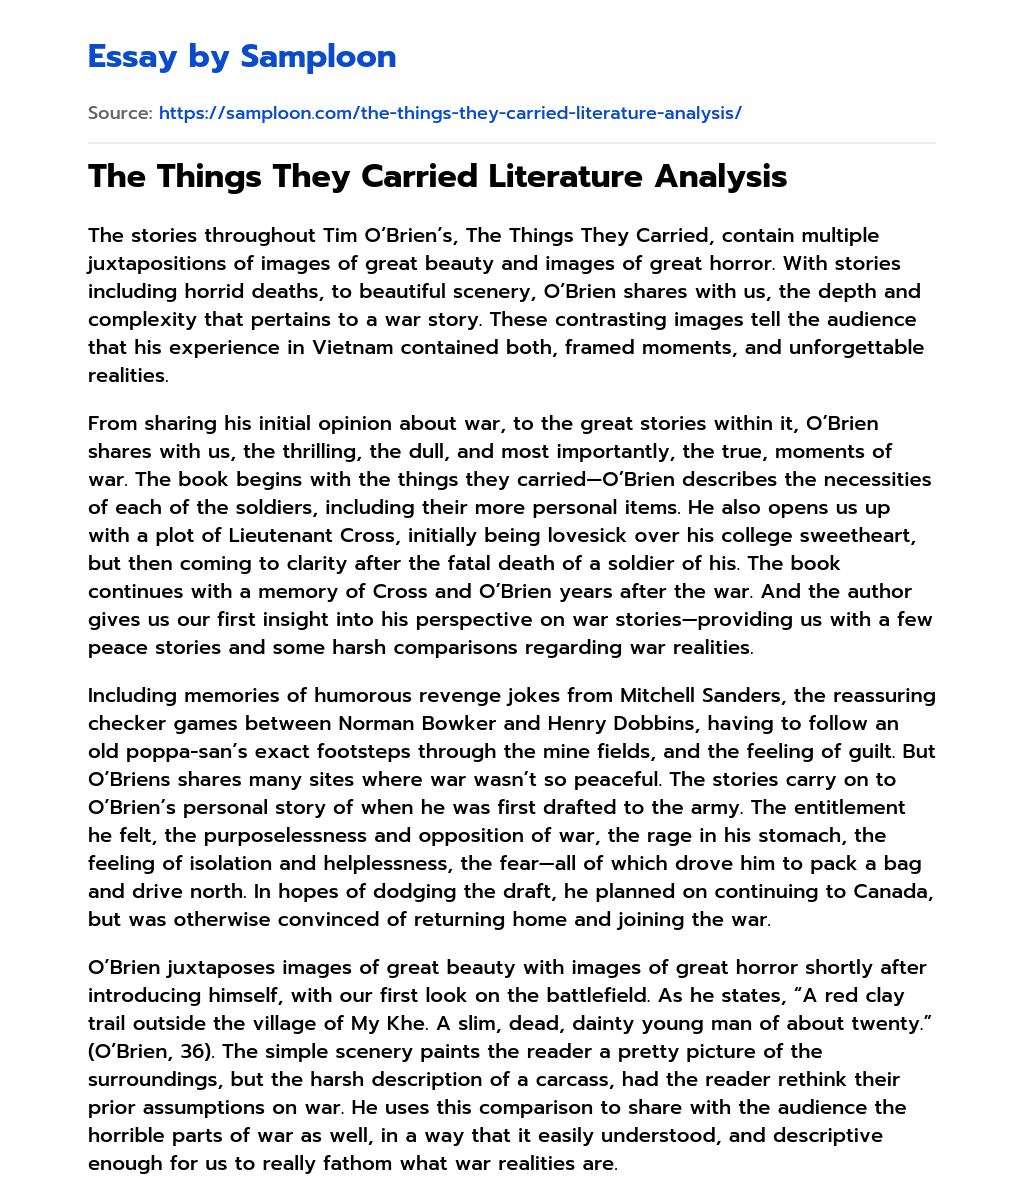 The Things They Carried Literature Analysis essay